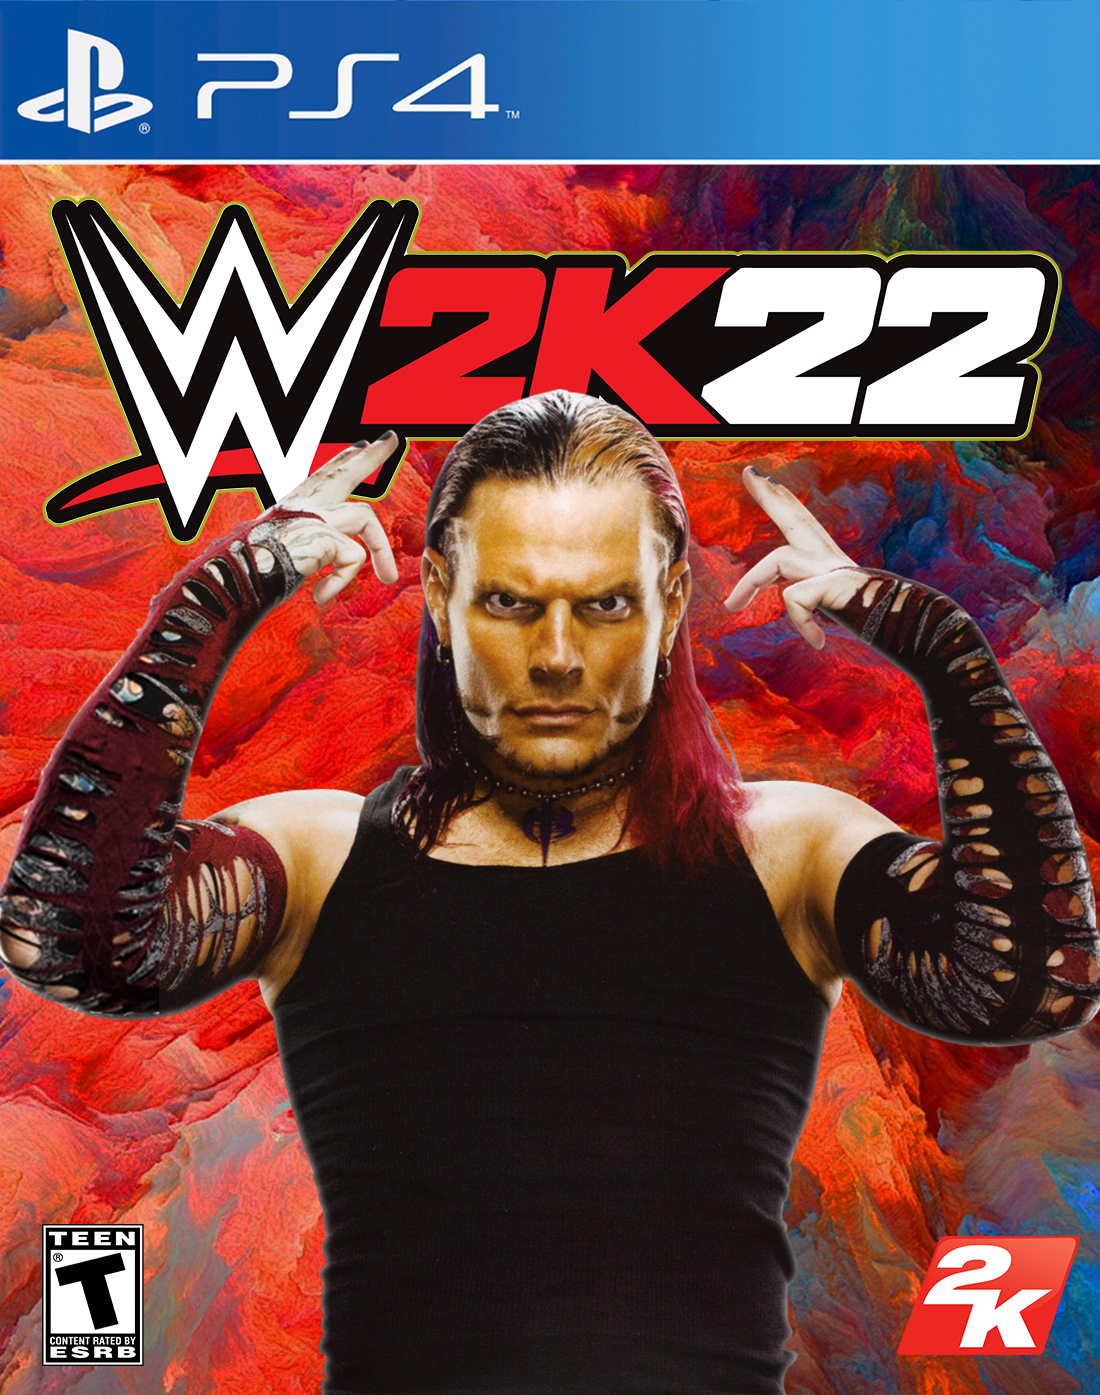 Wwe 2k22 Cover Concept By Blackstonee13 On Deviantart